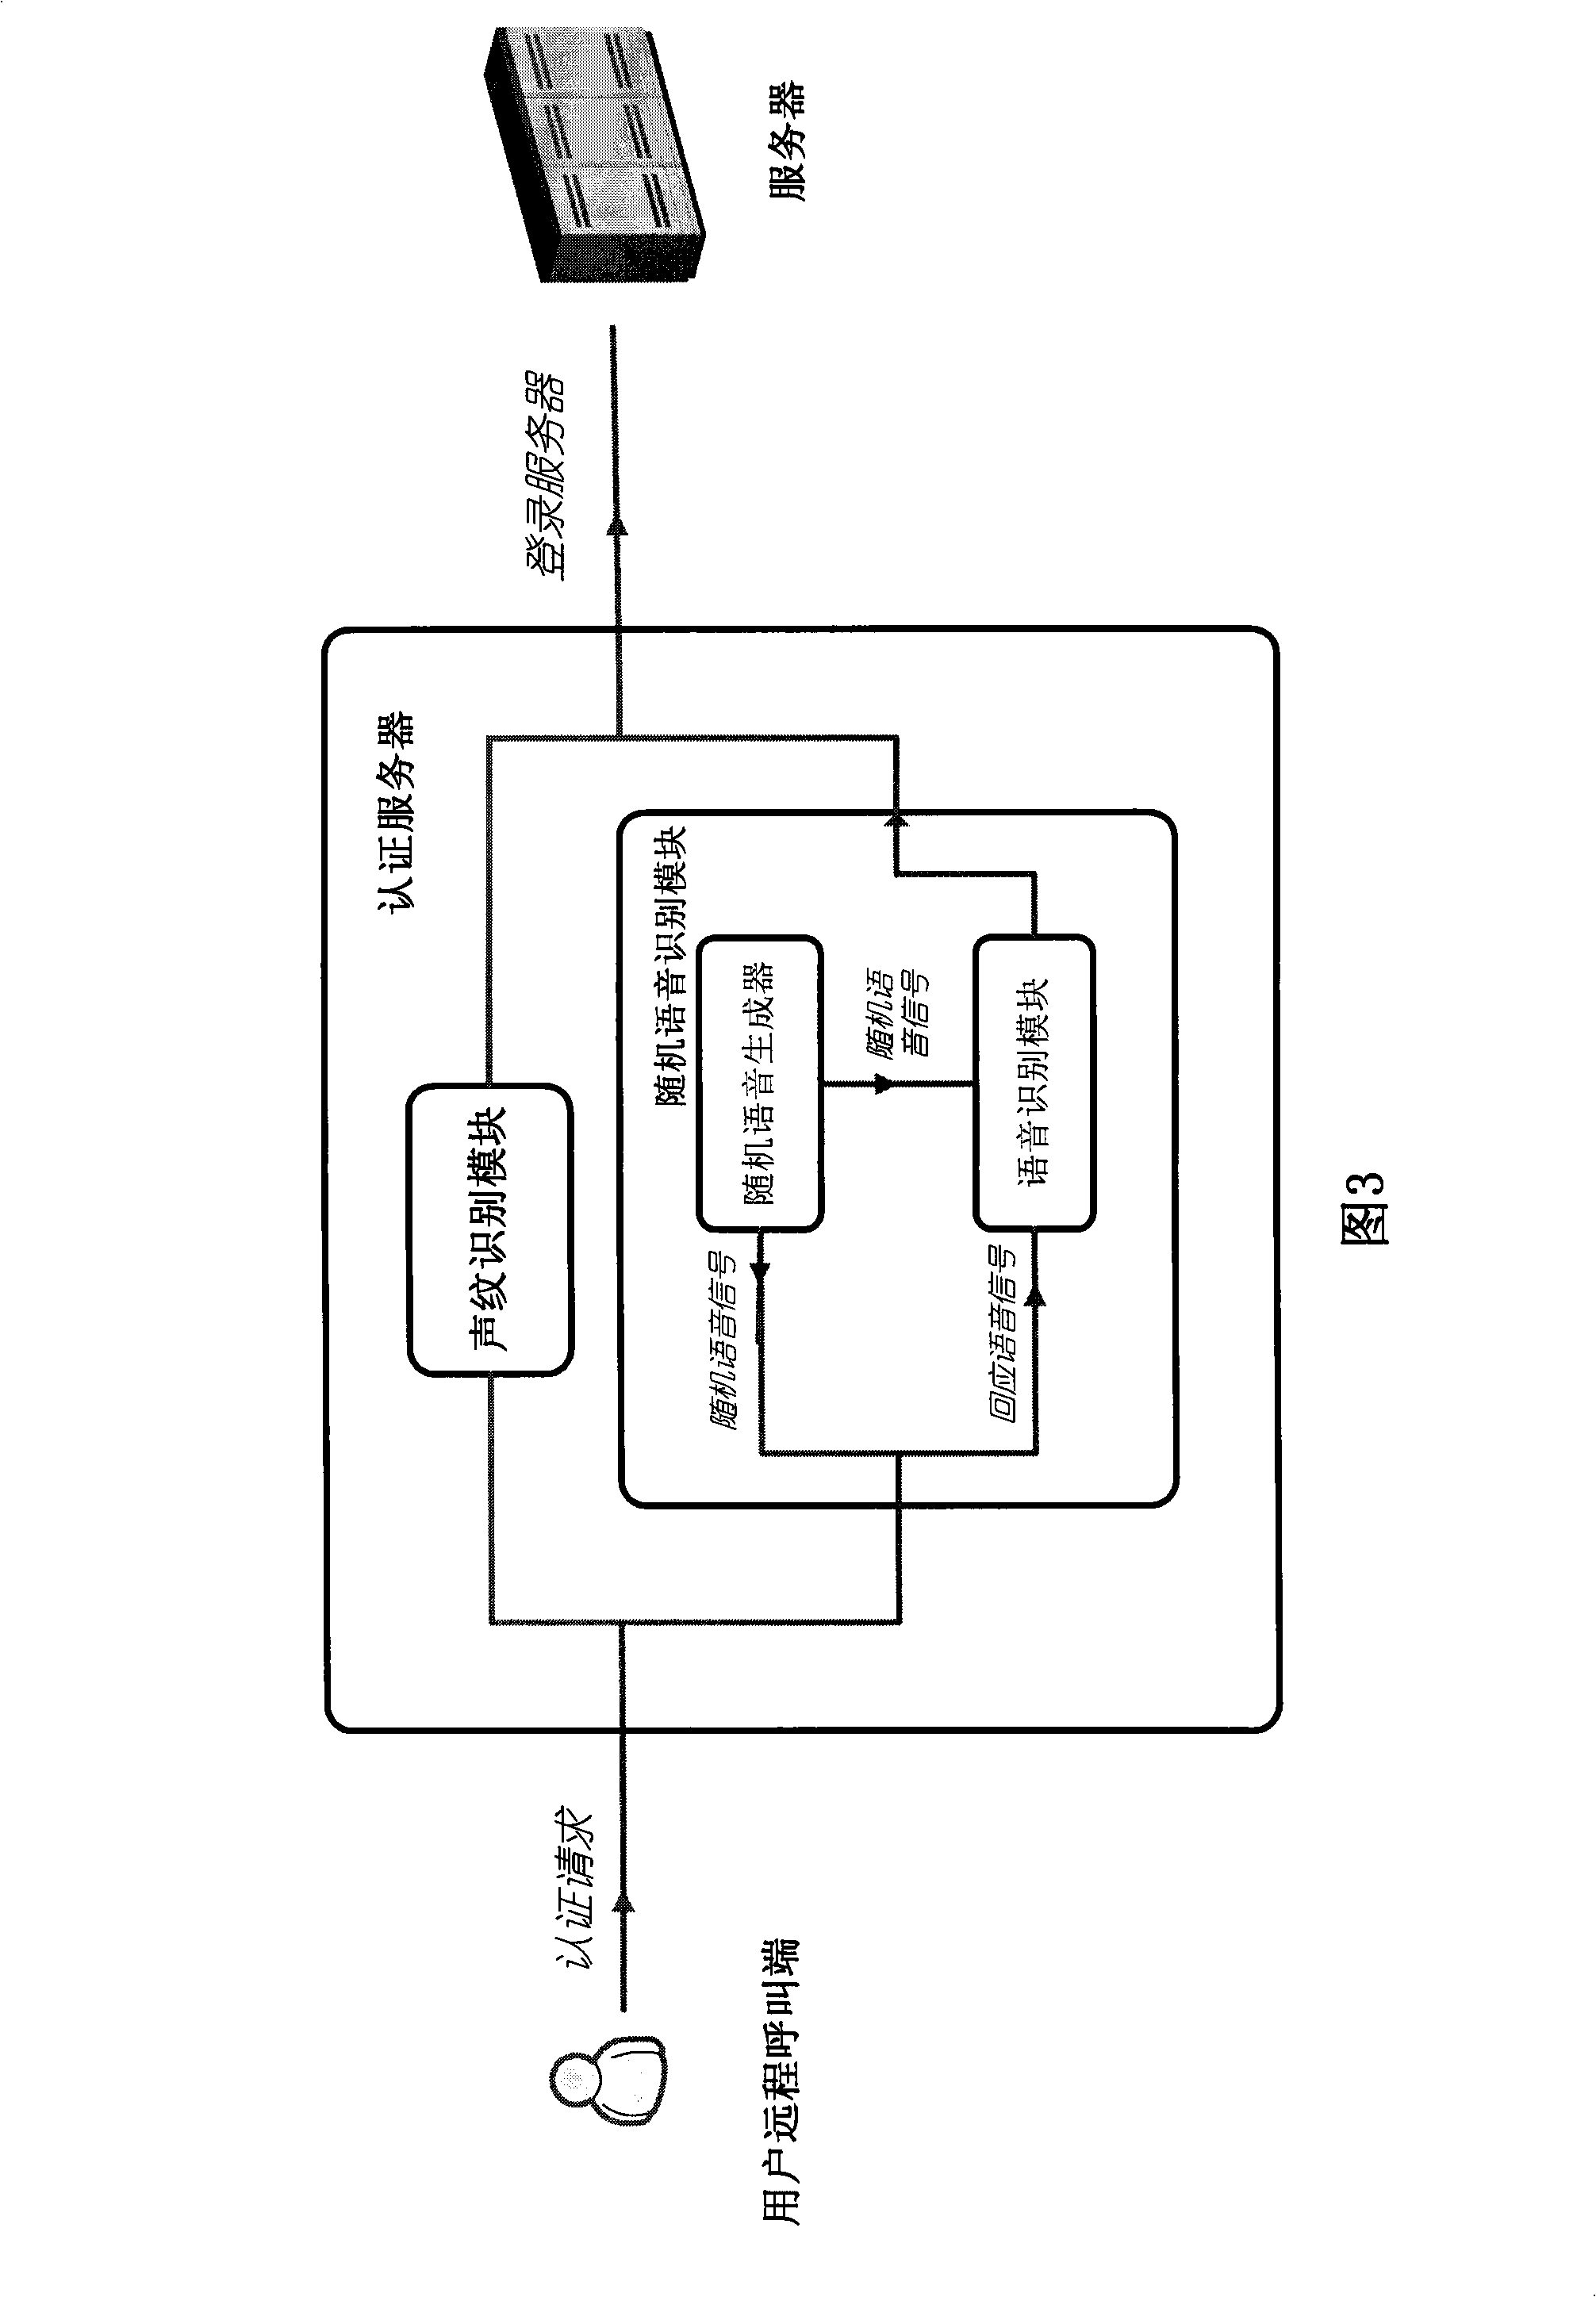 Remote voice identification authentication system and method